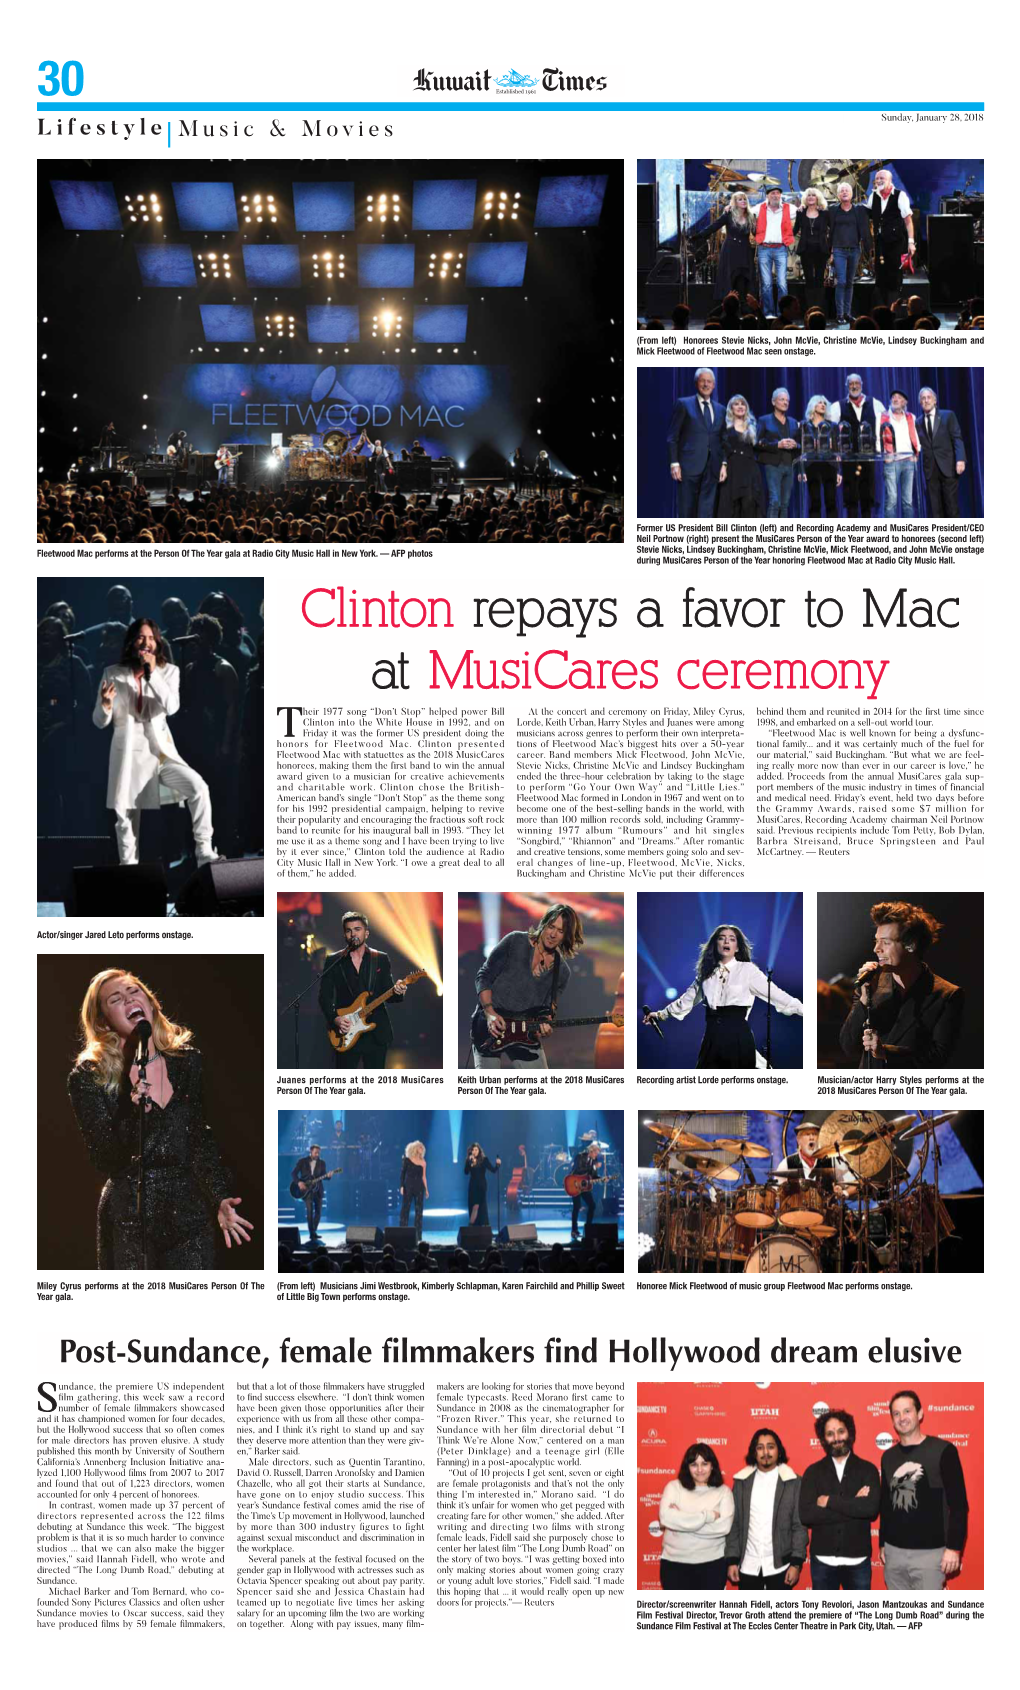 Clinton Repays a Favor to Mac at Musicares Ceremony